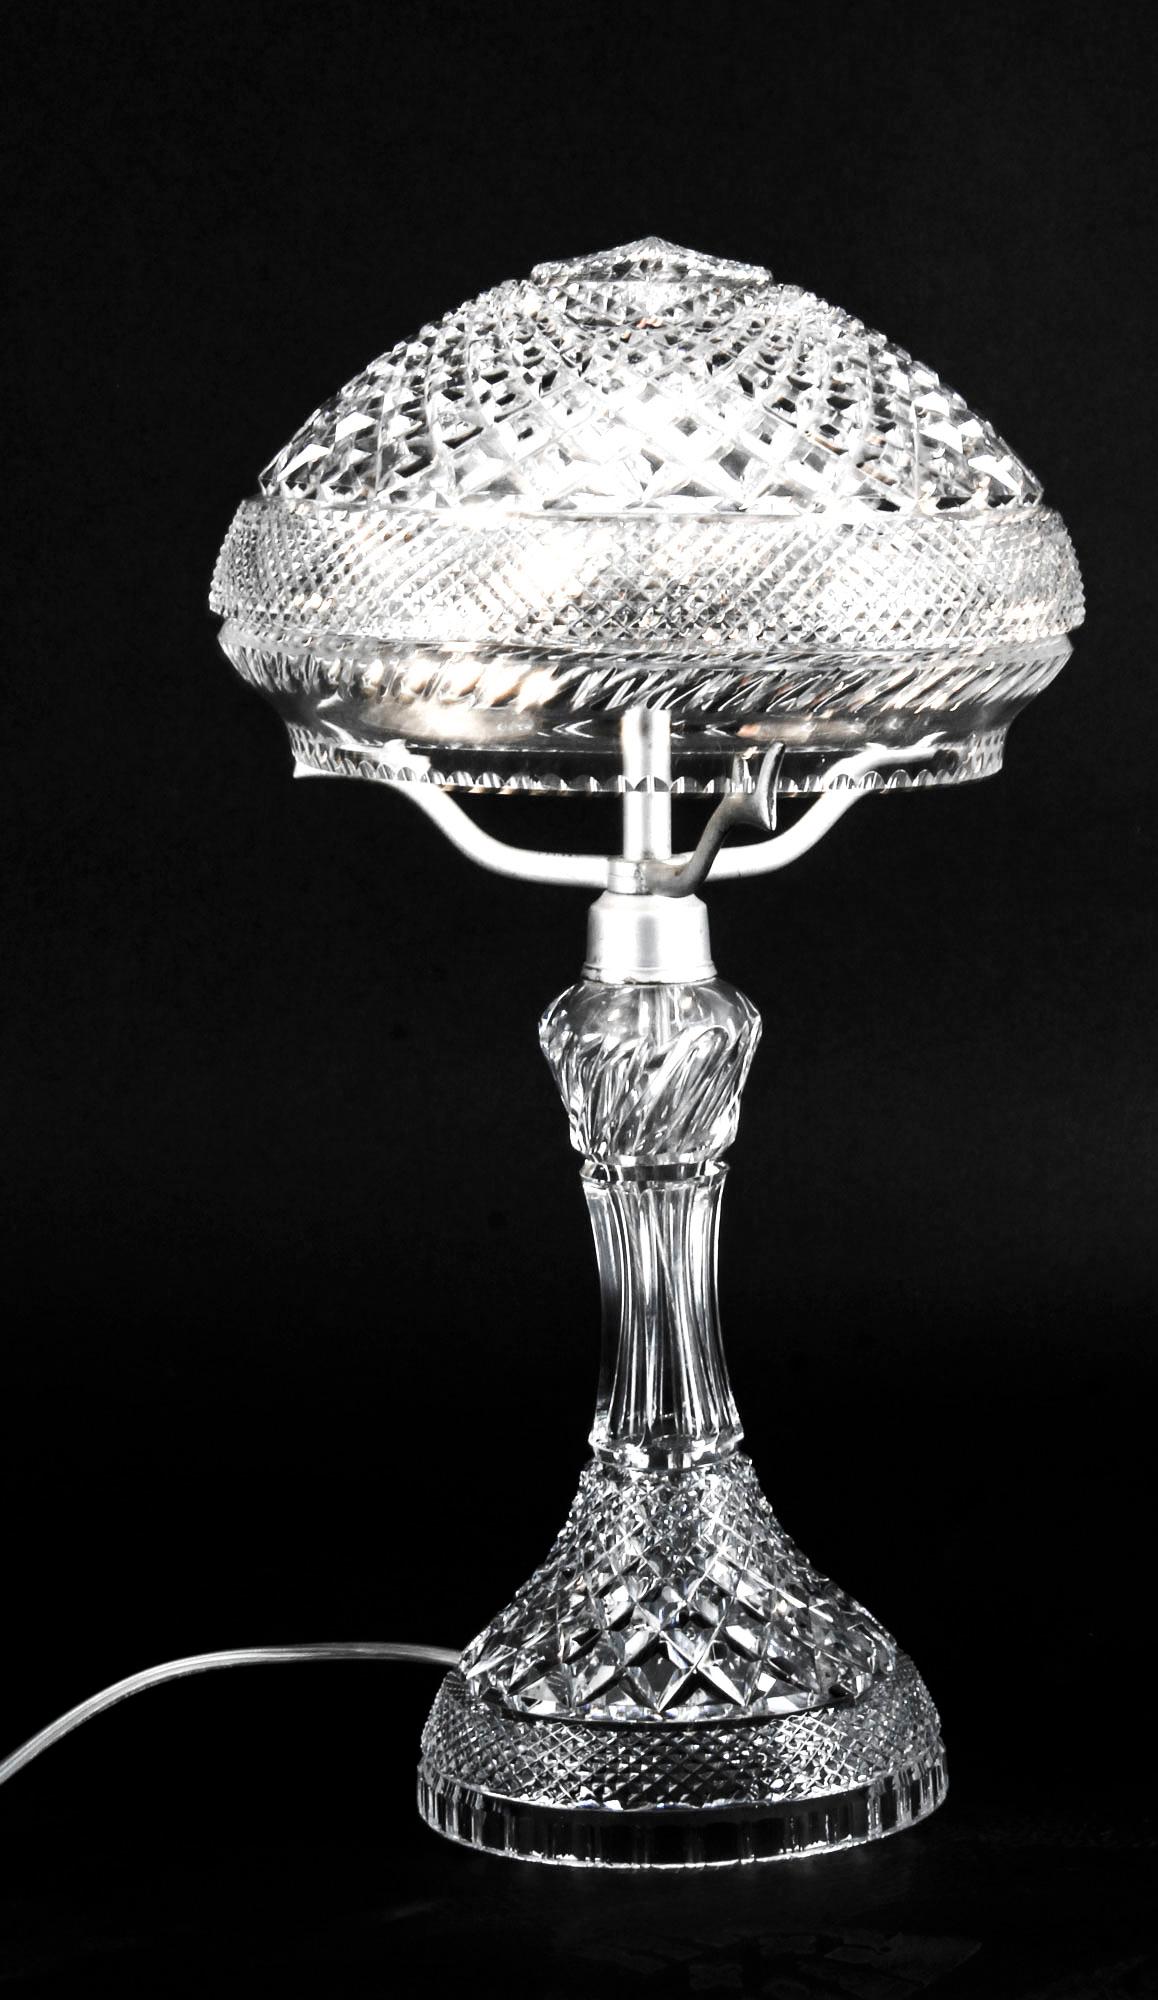 This is an elegant antique Edwardian crystal cut-glass table lamp, circa 1900 in date.

This stylish lamp has a striking elongated flared shaped pedestal stem and features a very detailed facetted cut glass mushroom shaped shade.
 
This